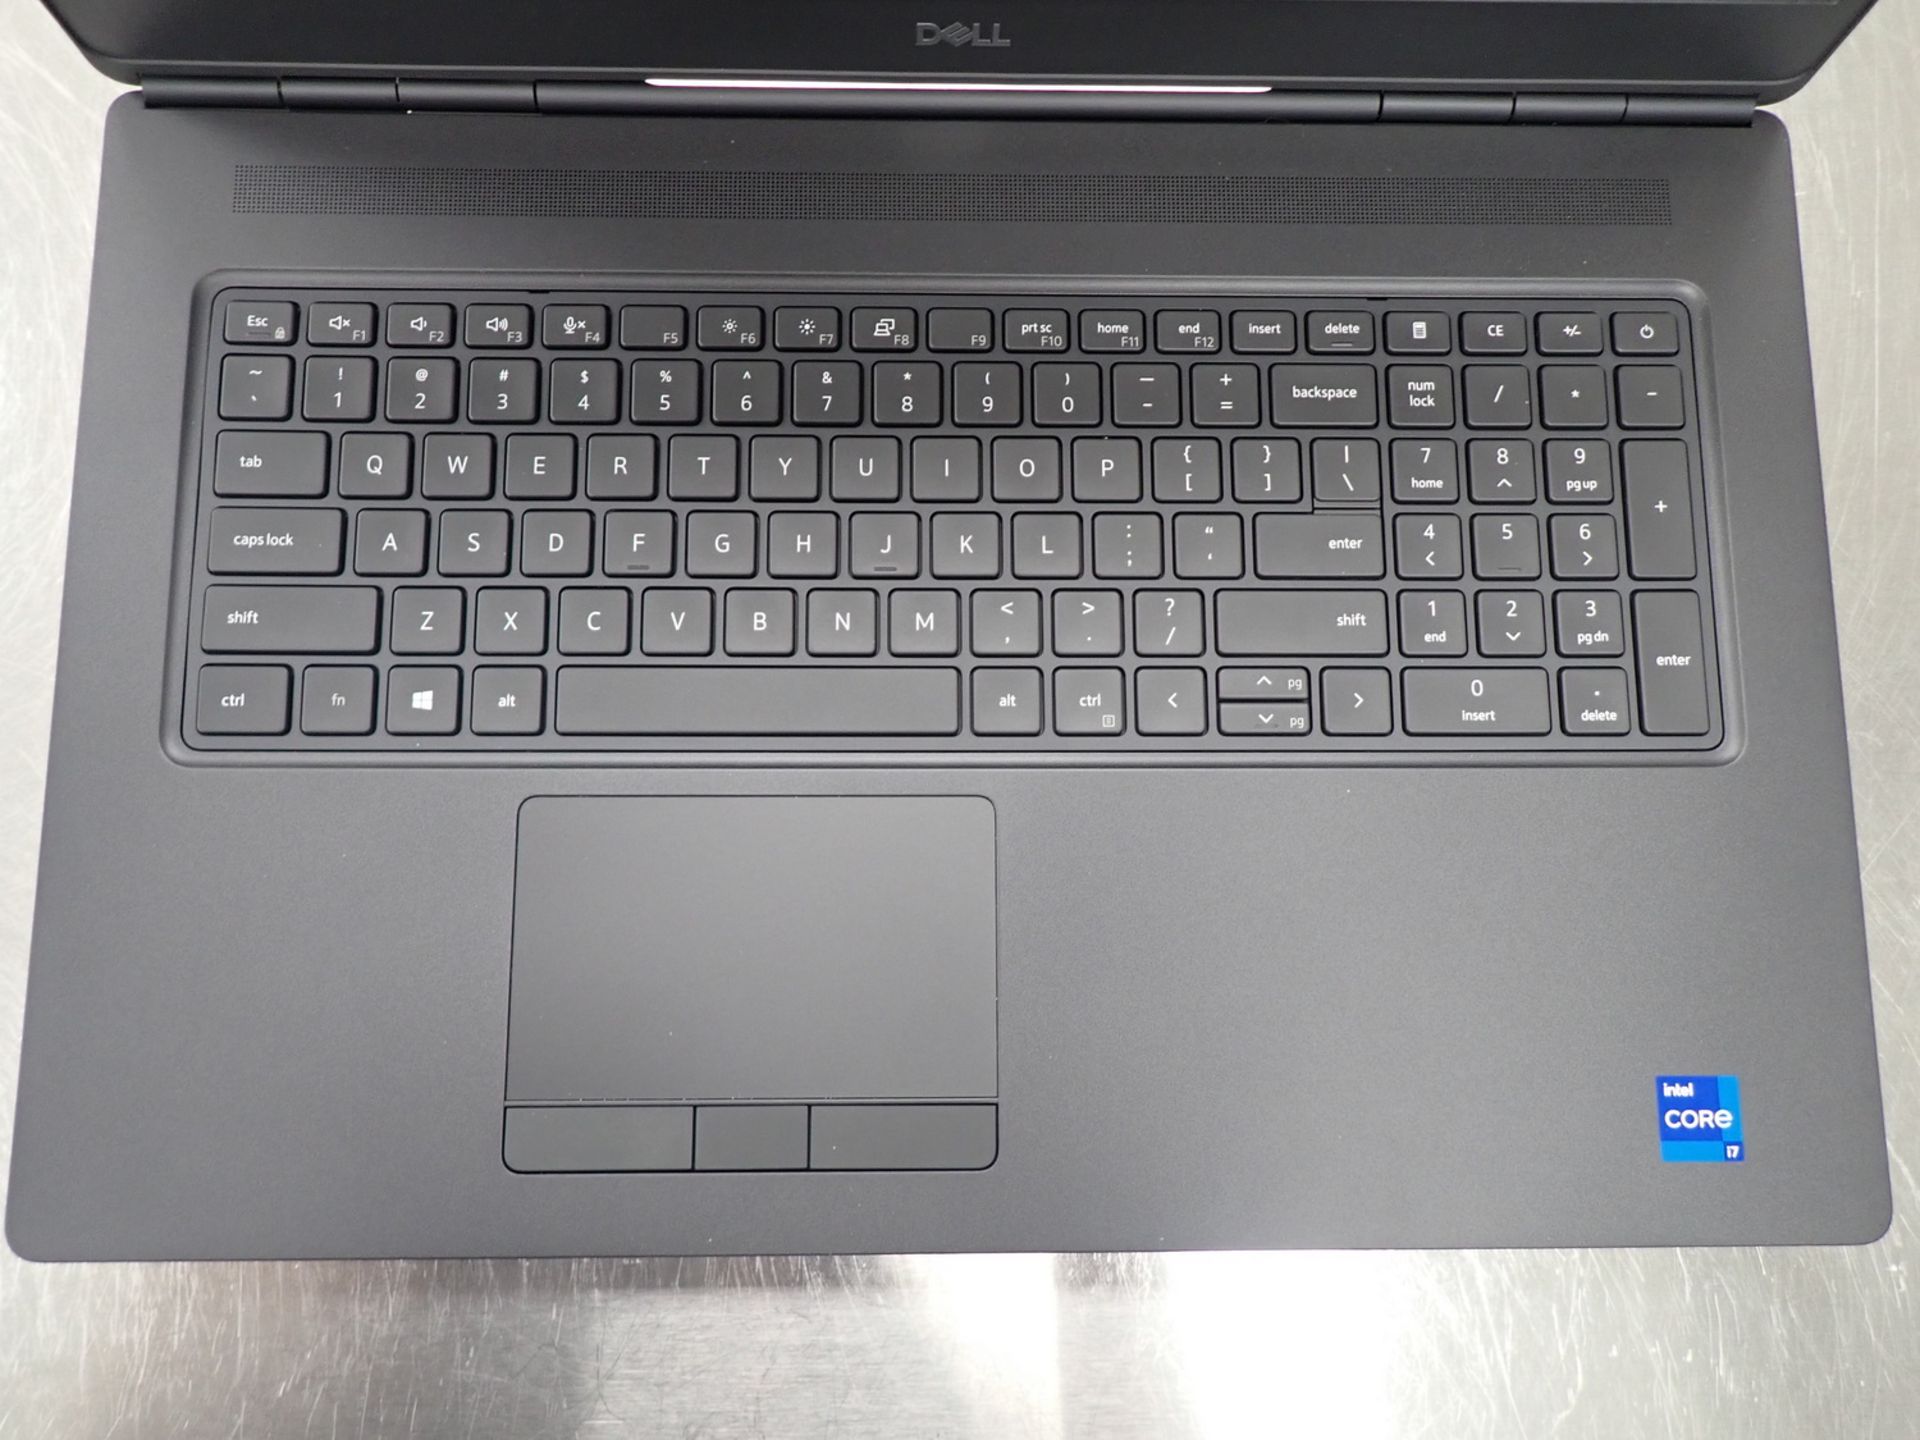 DELL PRECISION 7760 LAPTOP W/ INTEL CORE I7-11800H 11TH GEN 2.3GHZ CPU, 256GB SSD, 17.3"IPS FHD, - Image 2 of 2